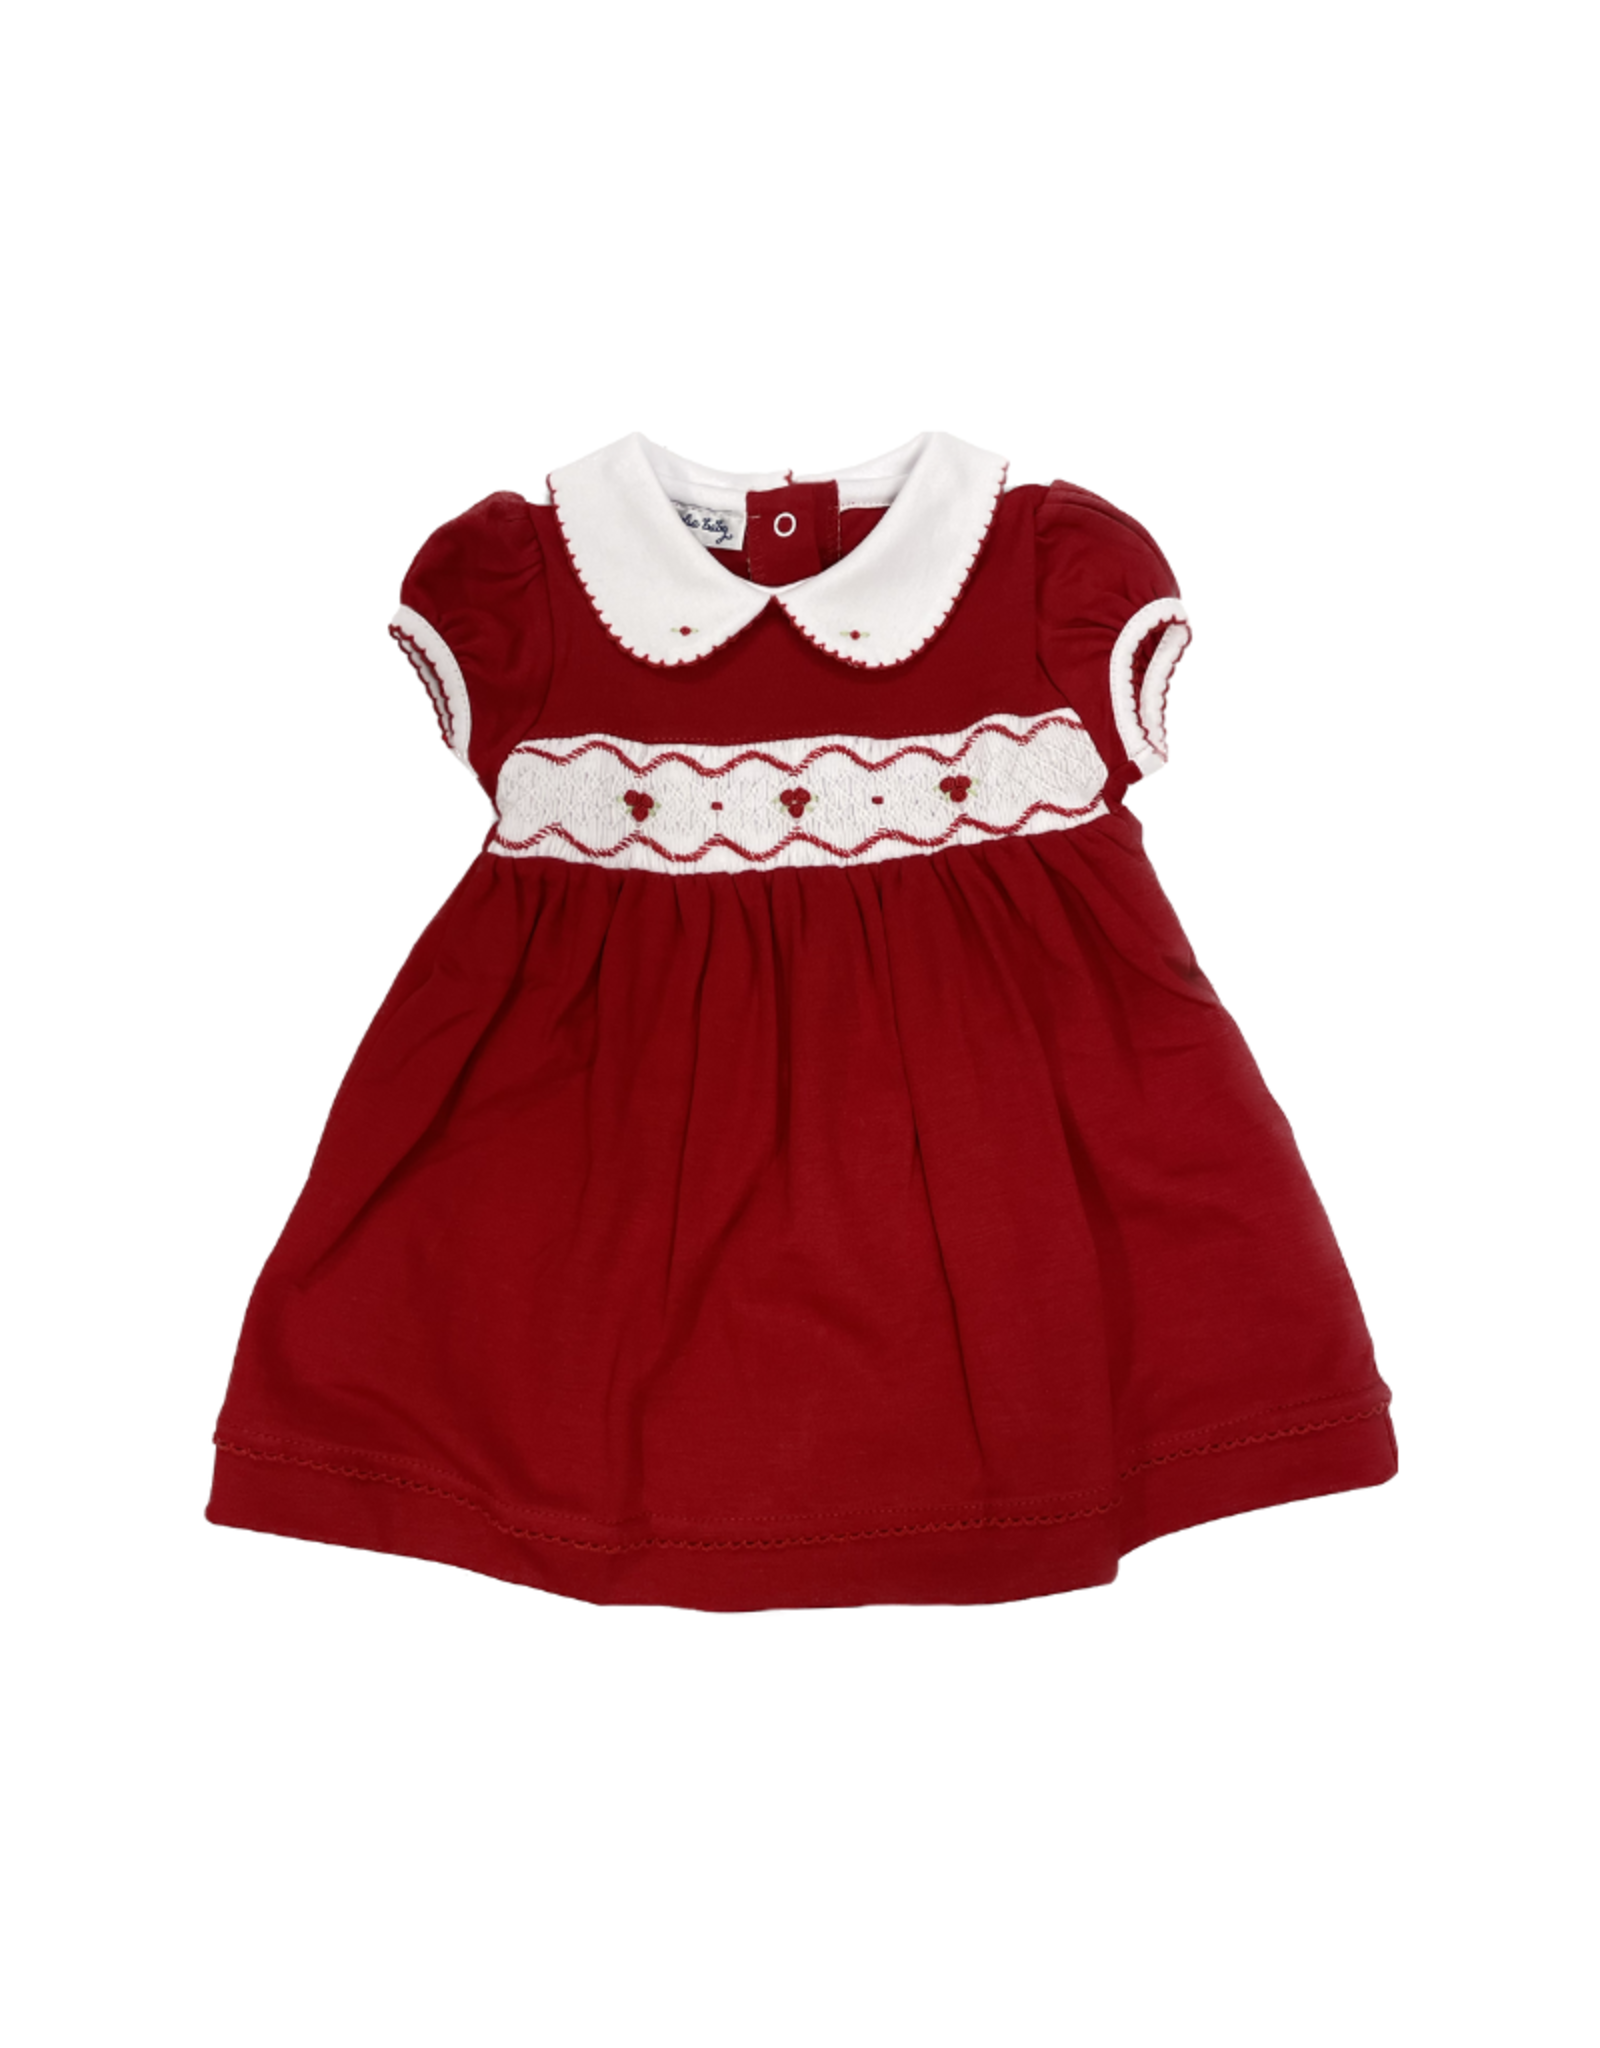 Magnolia Baby Cora Cooper Red Smock Collared Dress